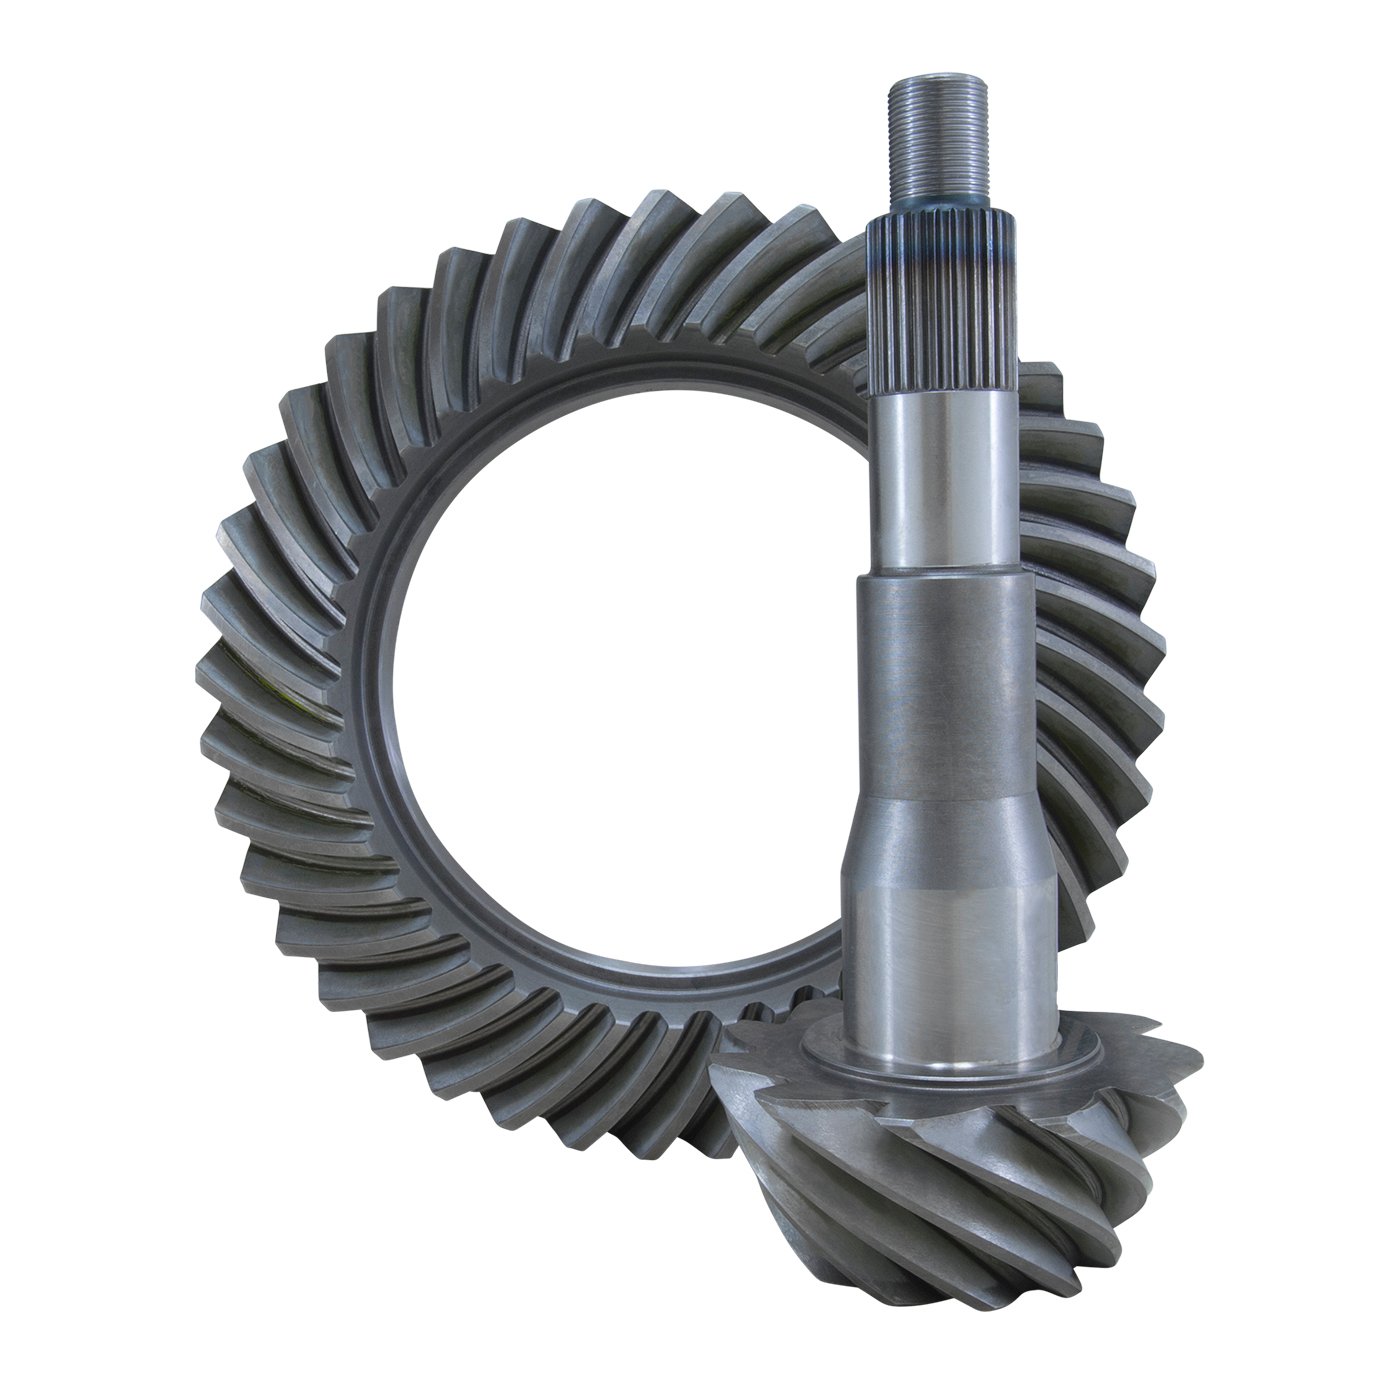 USA Standard 36110 Ring & Pinion Gear Set, For Ford 10.25 in., 4.88 Ratio